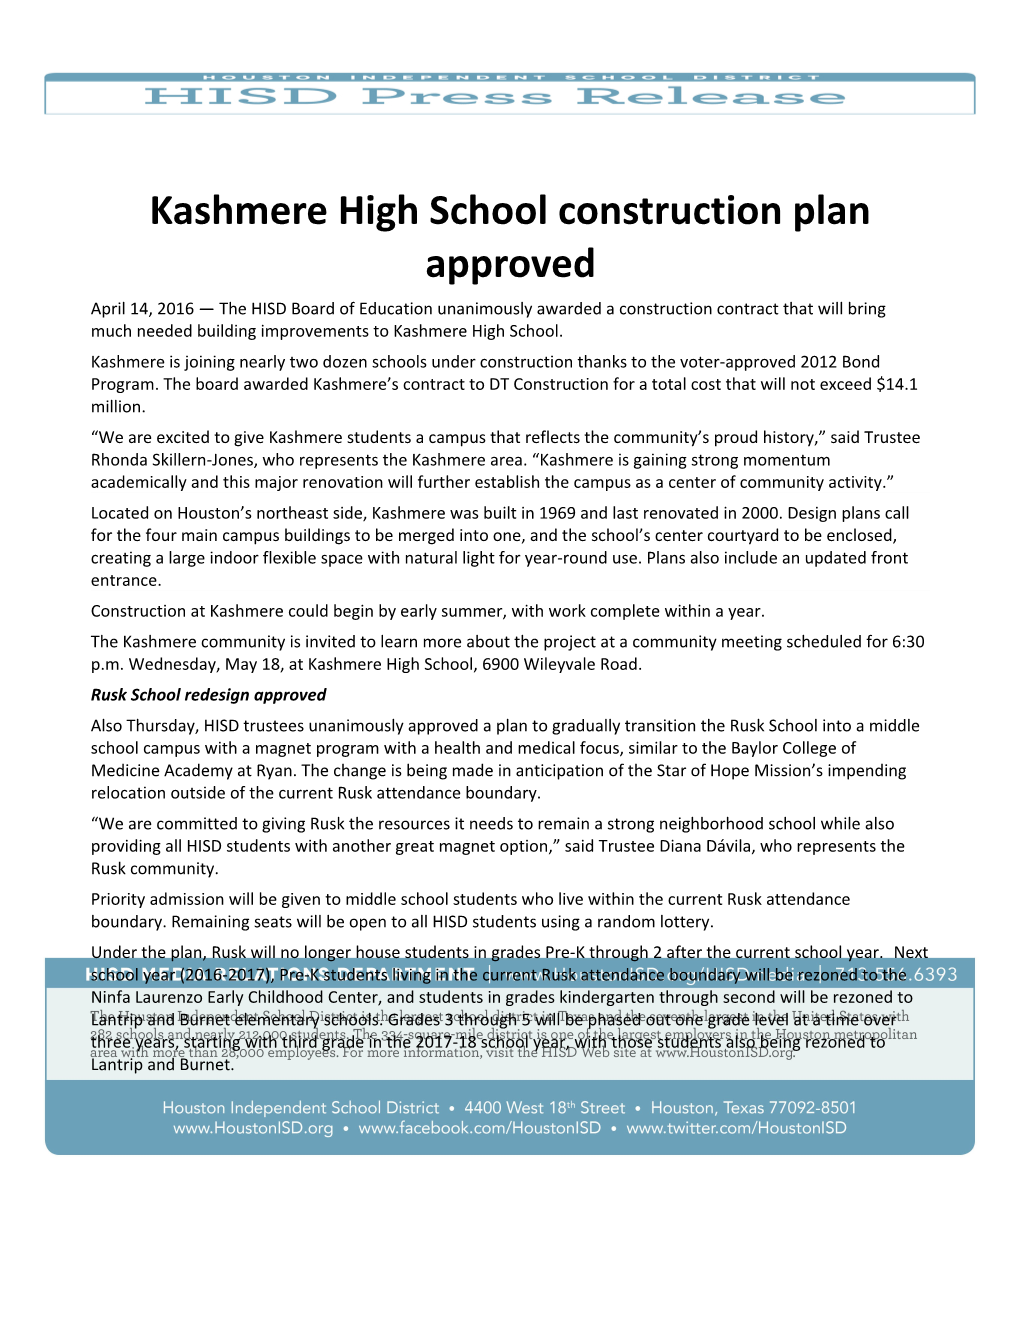 Kashmere High School Construction Plan Approved